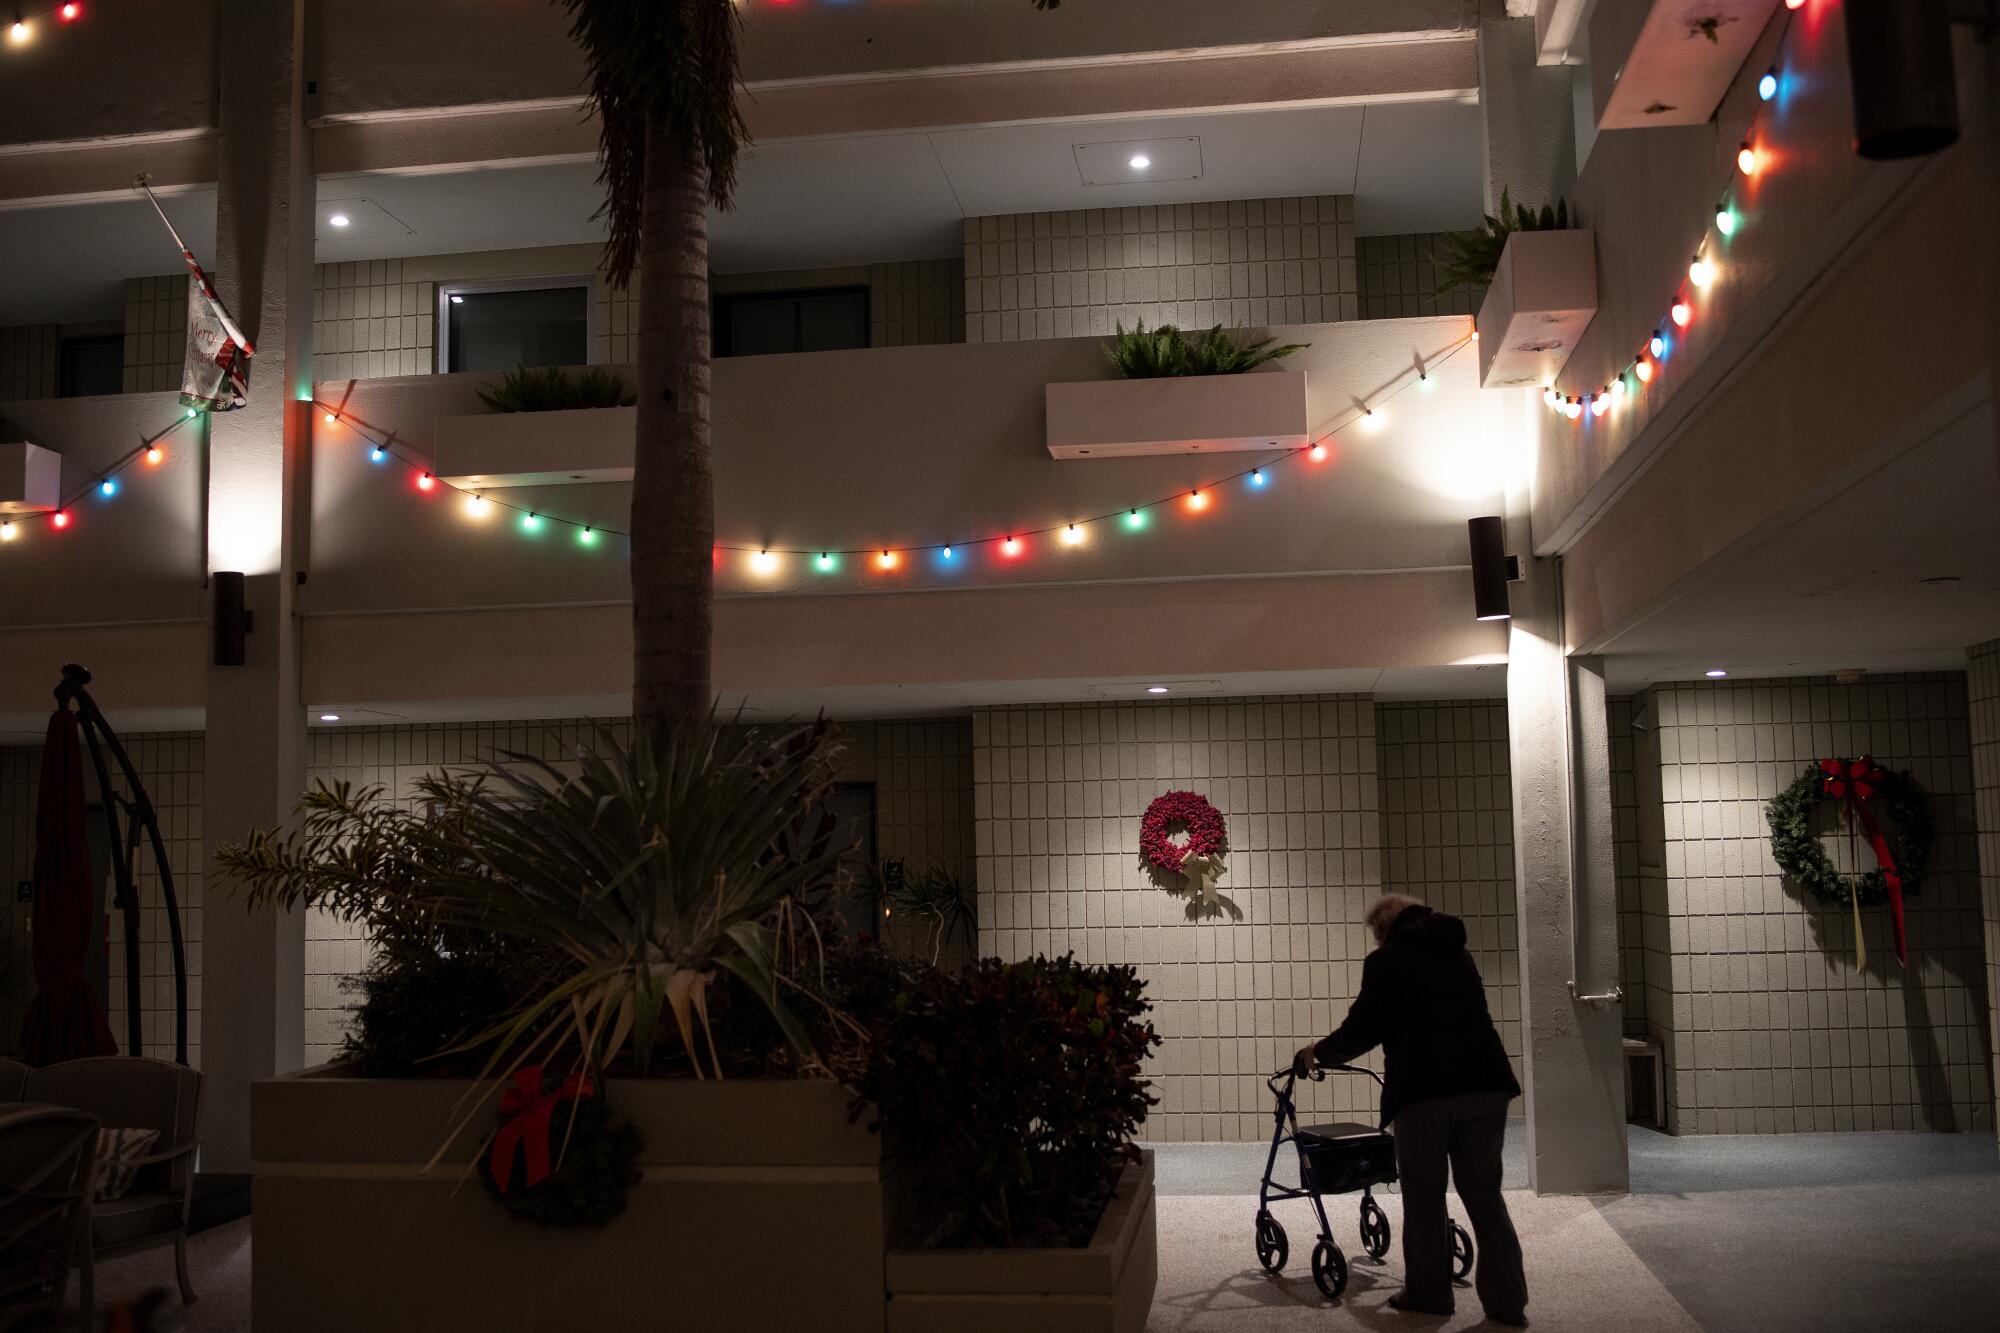 A silhouetted woman uses a walker in an apartment complex decorated with Christmas lights.